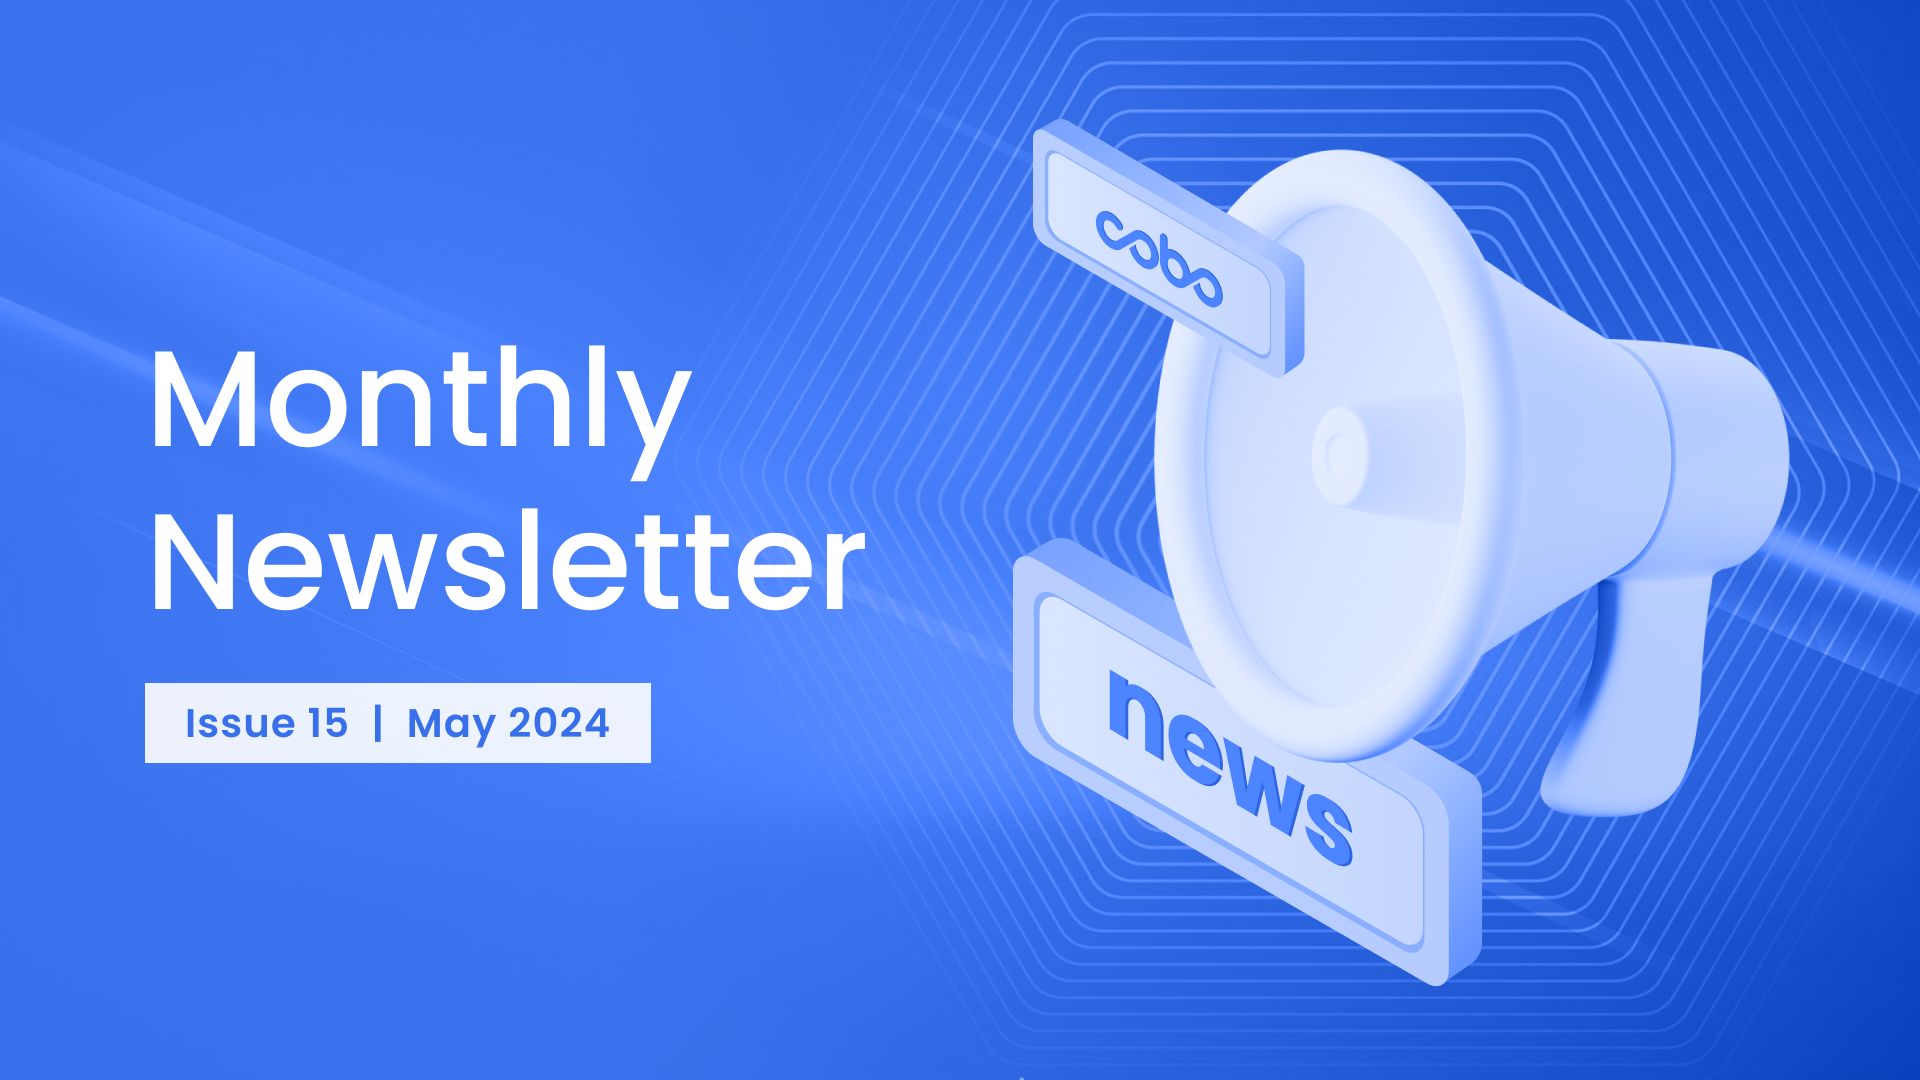 Cobo Monthly Newsletter - May 2024